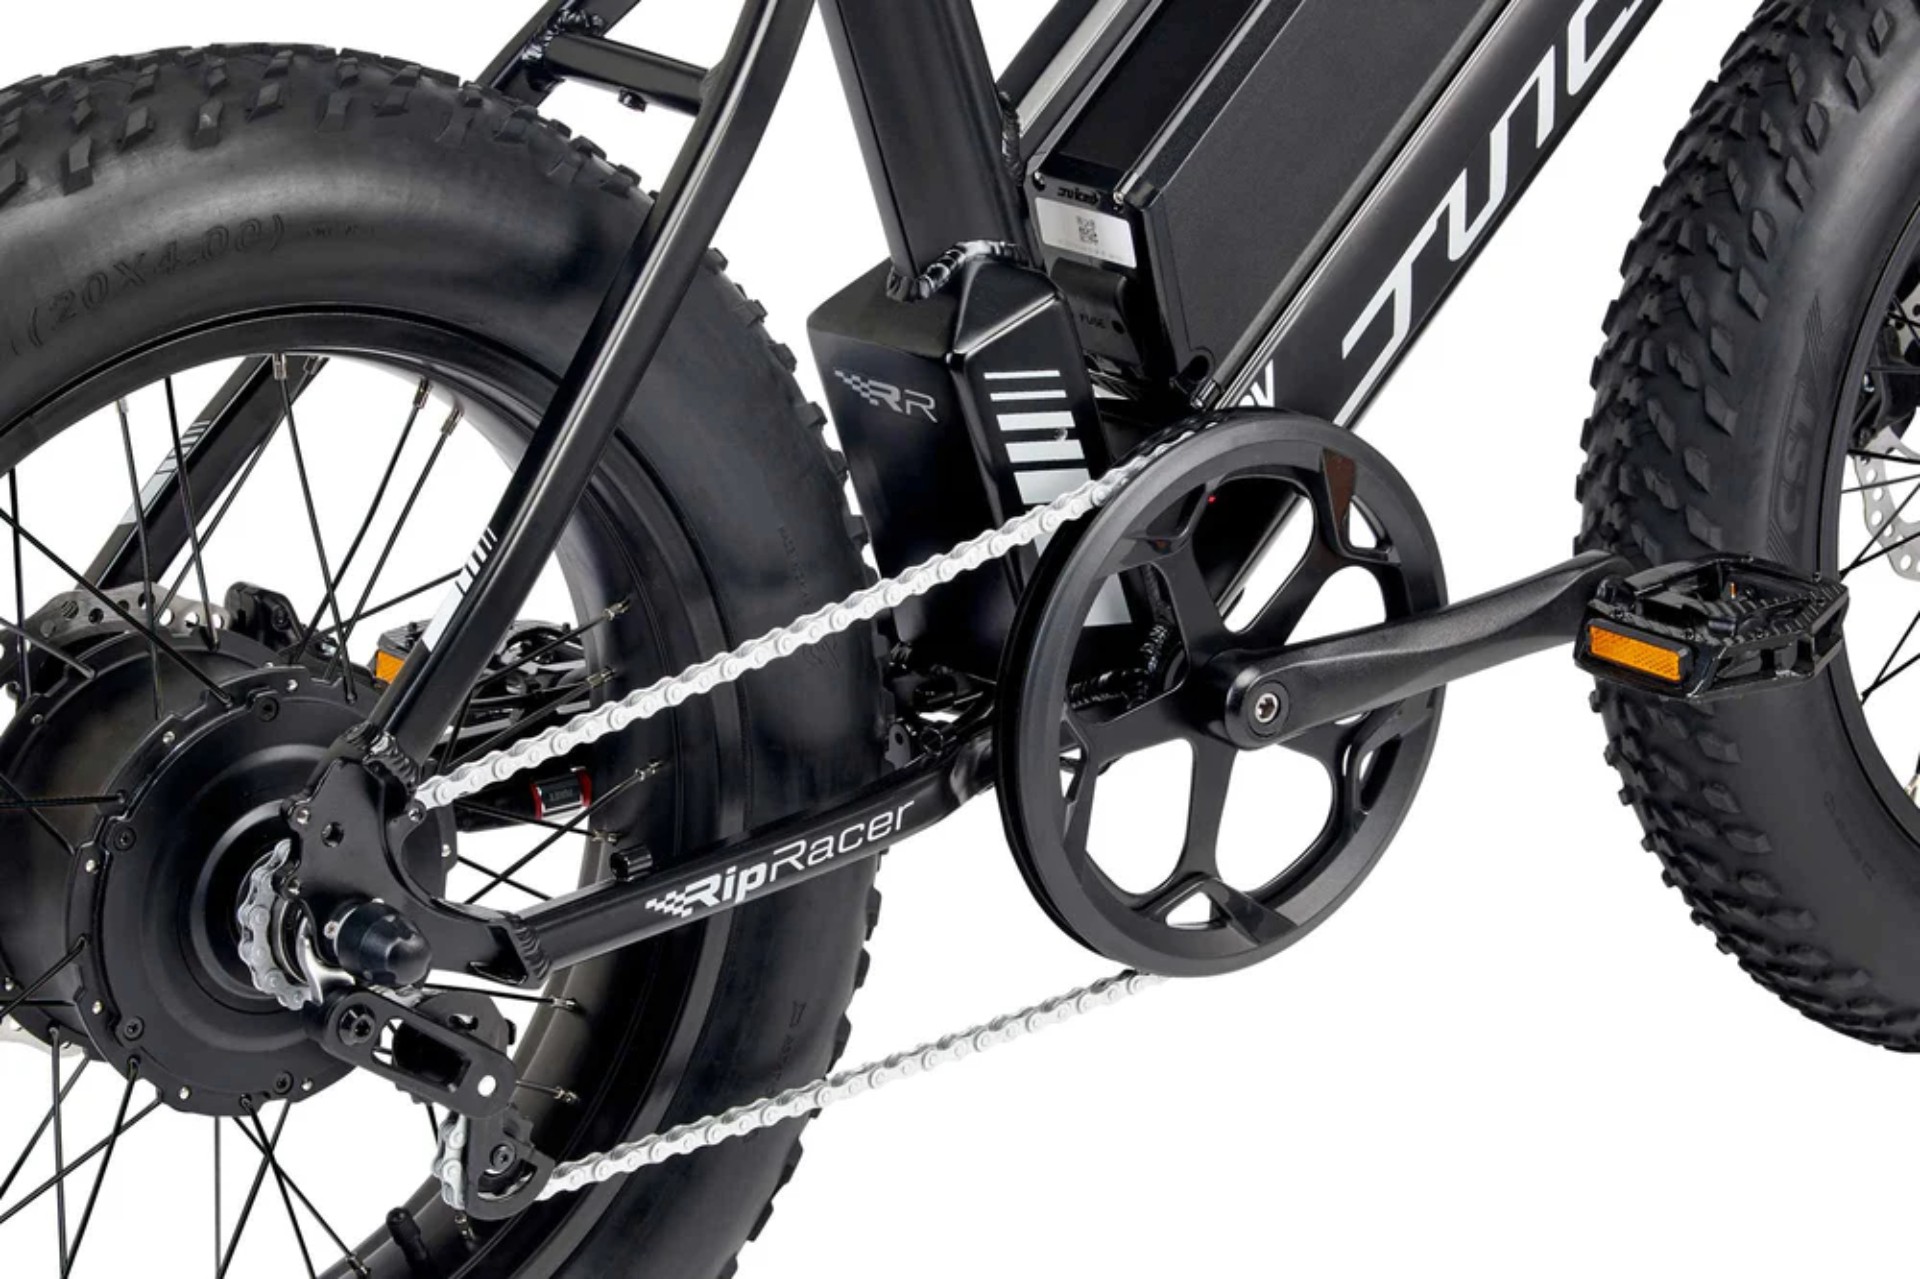 The RipRacer Fat-Tire E-Bike Is All About Budget-Friendly Fun and